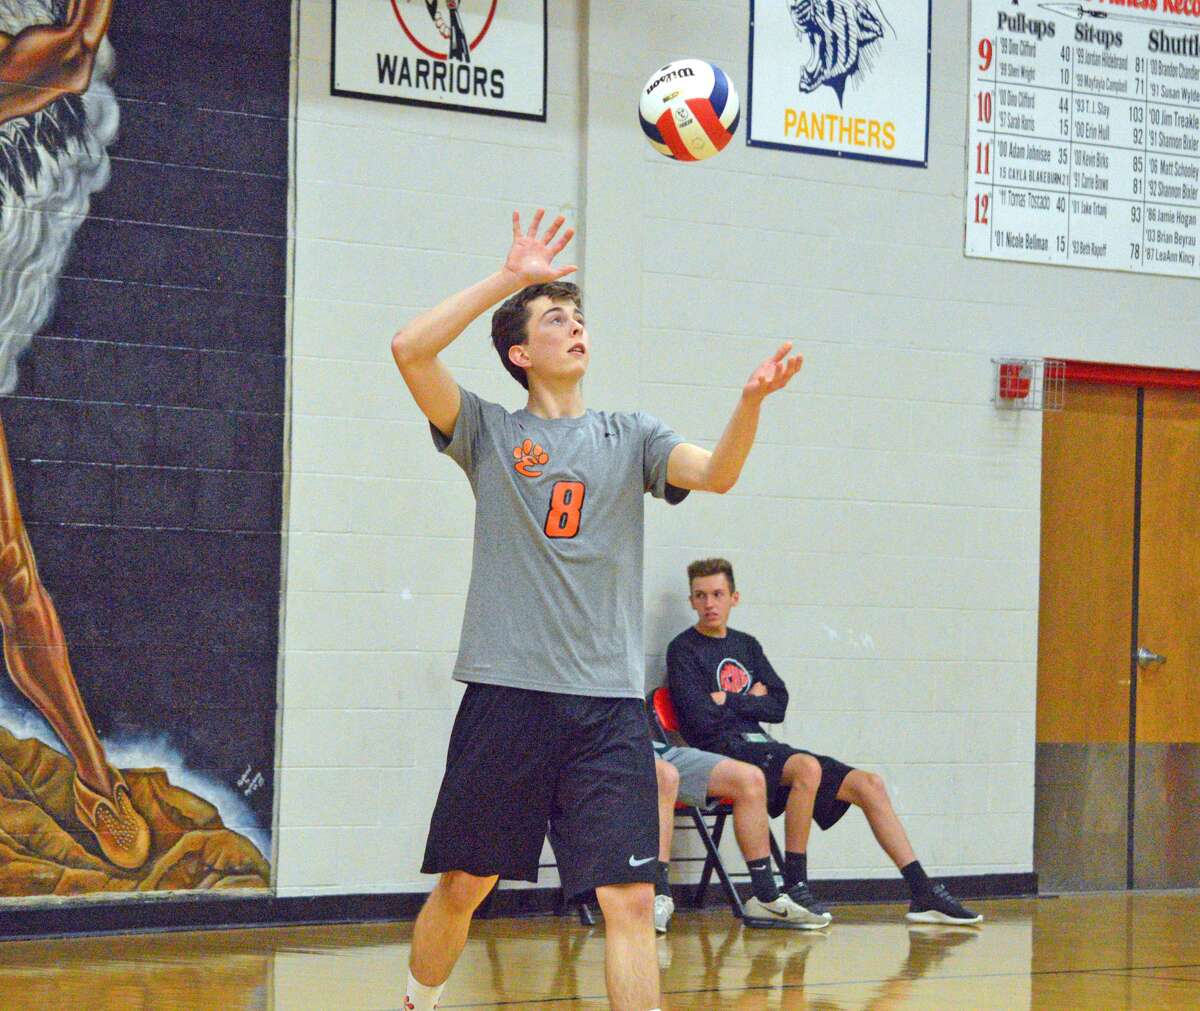 Edwardsville senior Curt Sellers serves the ball during the second game of Tuesday’s match against Granite City in the semifinals of the Granite City Regional.